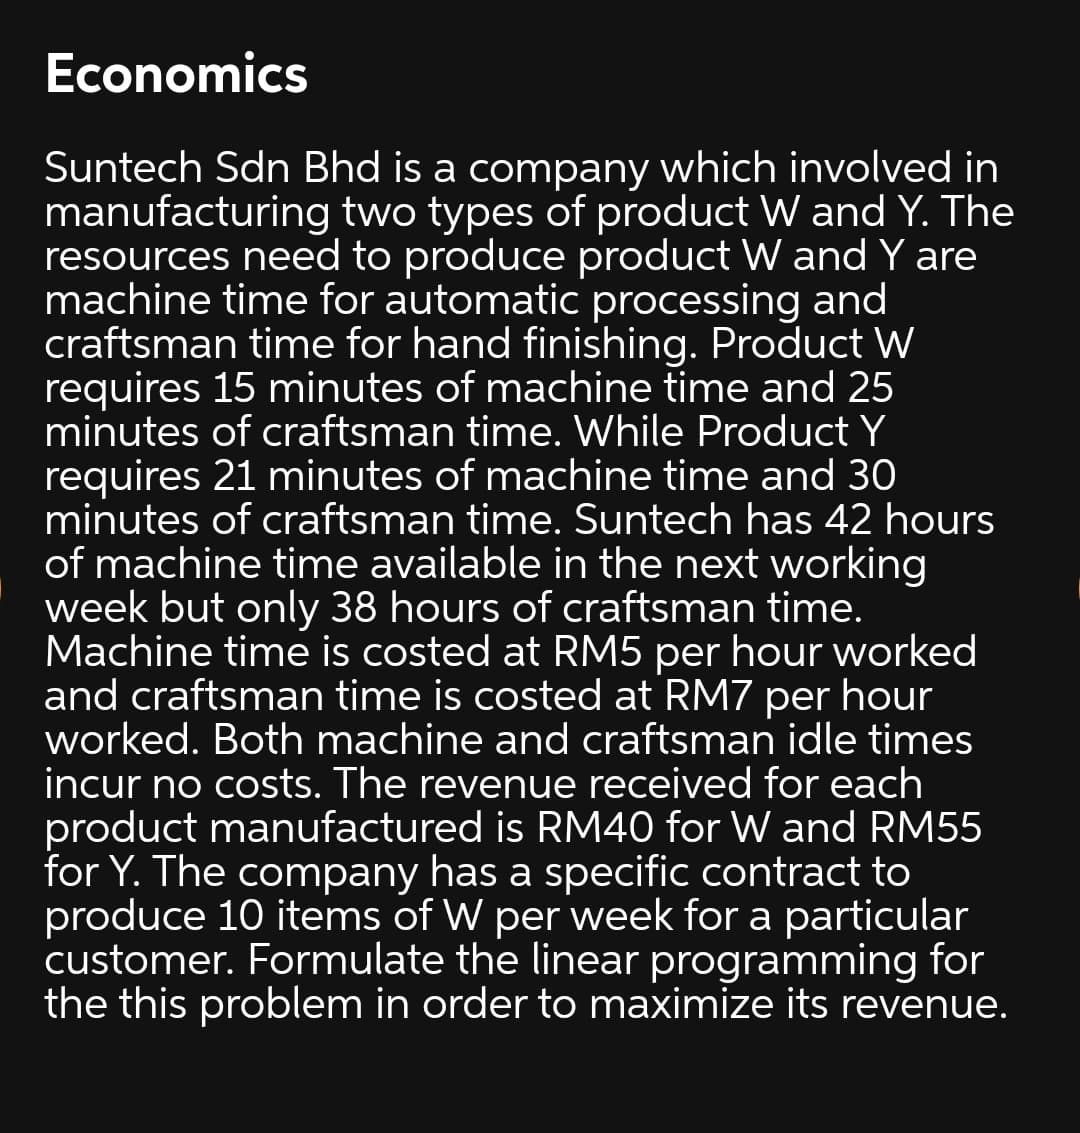 Economics
Suntech Sdn Bhd is a company which involved in
manufacturing two types of product W and Y. The
resources need to produce product W and Y are
machine time for automatic processing and
craftsman time for hand finishing. Product W
requires 15 minutes of machine time and 25
minutes of craftsman time. While Product Y
requires 21 minutes of machine time and 30
minutes of craftsman time. Suntech has 42 hours
of machine time available in the next working
week but only 38 hours of craftsman time.
Machine time is costed at RM5 per hour worked
and craftsman time is costed at RM7 per hour
worked. Both machine and craftsman idle times
incur no costs. The revenue received for each
product manufactured is RM40 for W and RM55
for Y. The company has a specific contract to
produce 10 items of W per week for a particular
customer. Formulate the linear programming for
the this problem in order to maximize its revenue.
